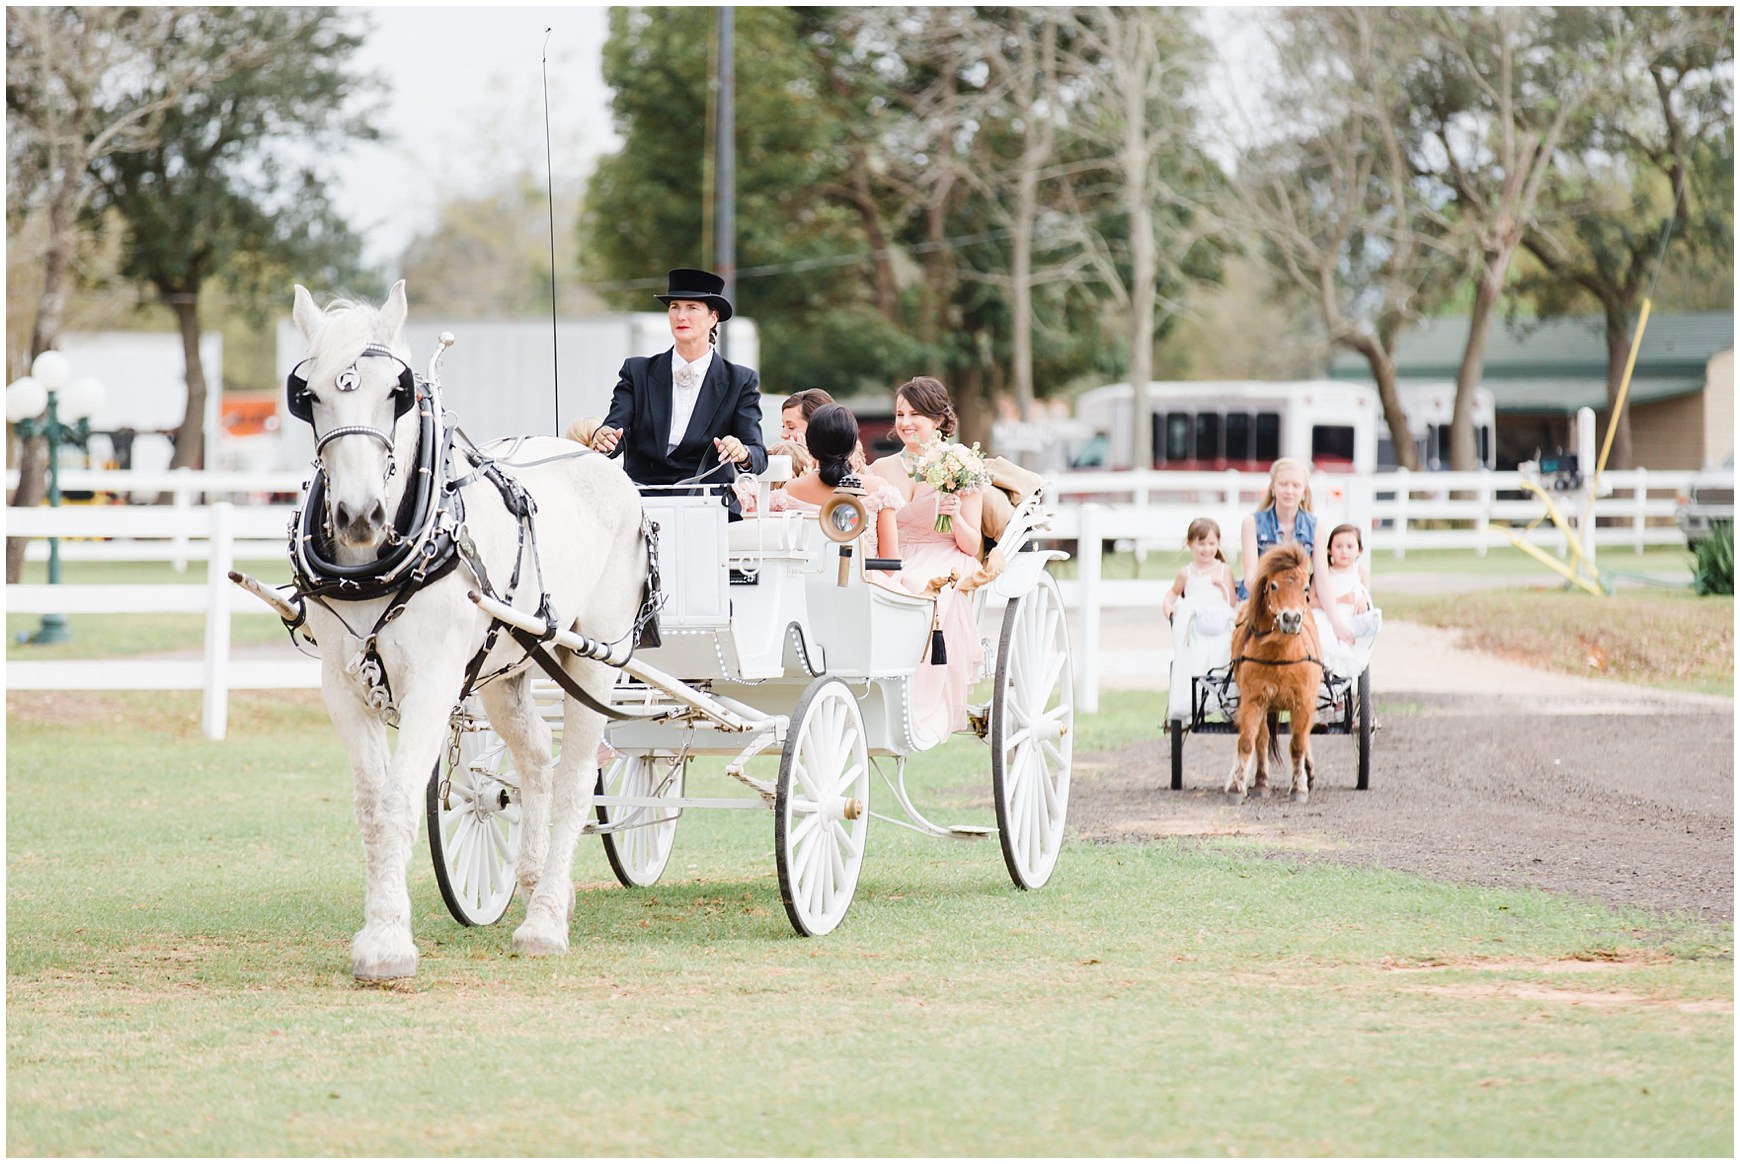 Bridal Party arriving in horse drawn carriage